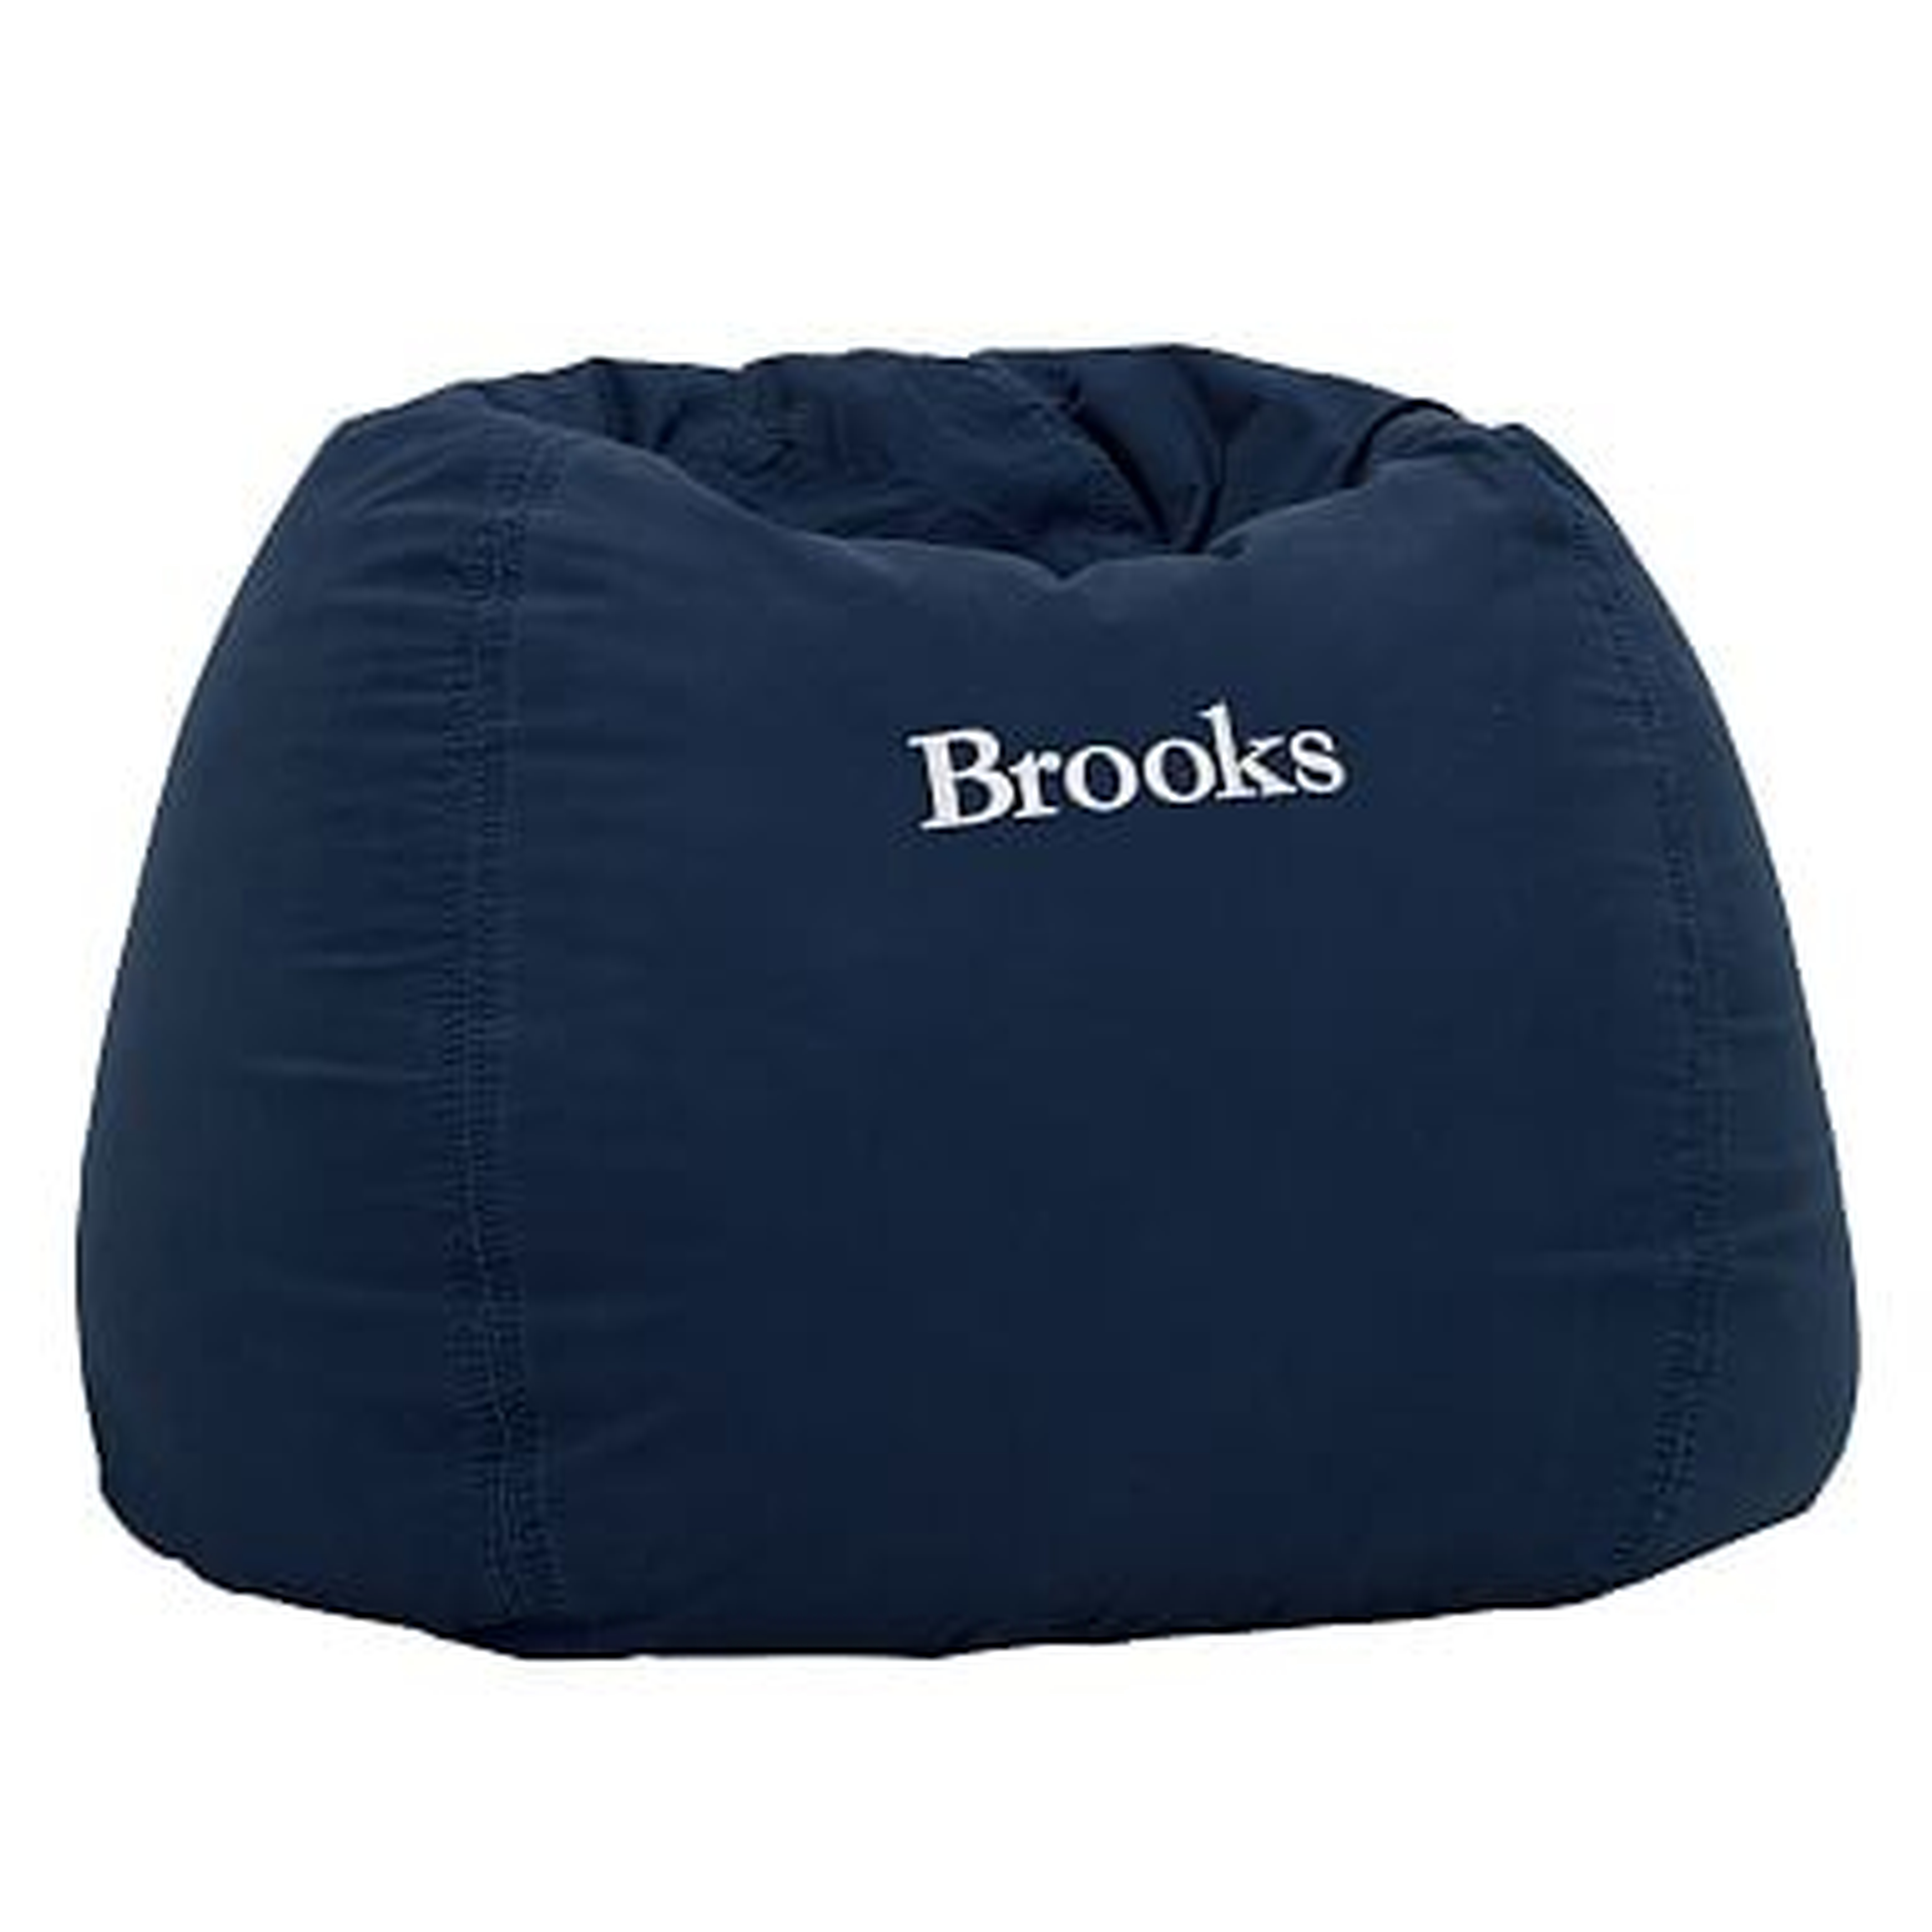 Washed Twill Beanbag Cover, Large, Navy - Pottery Barn Teen